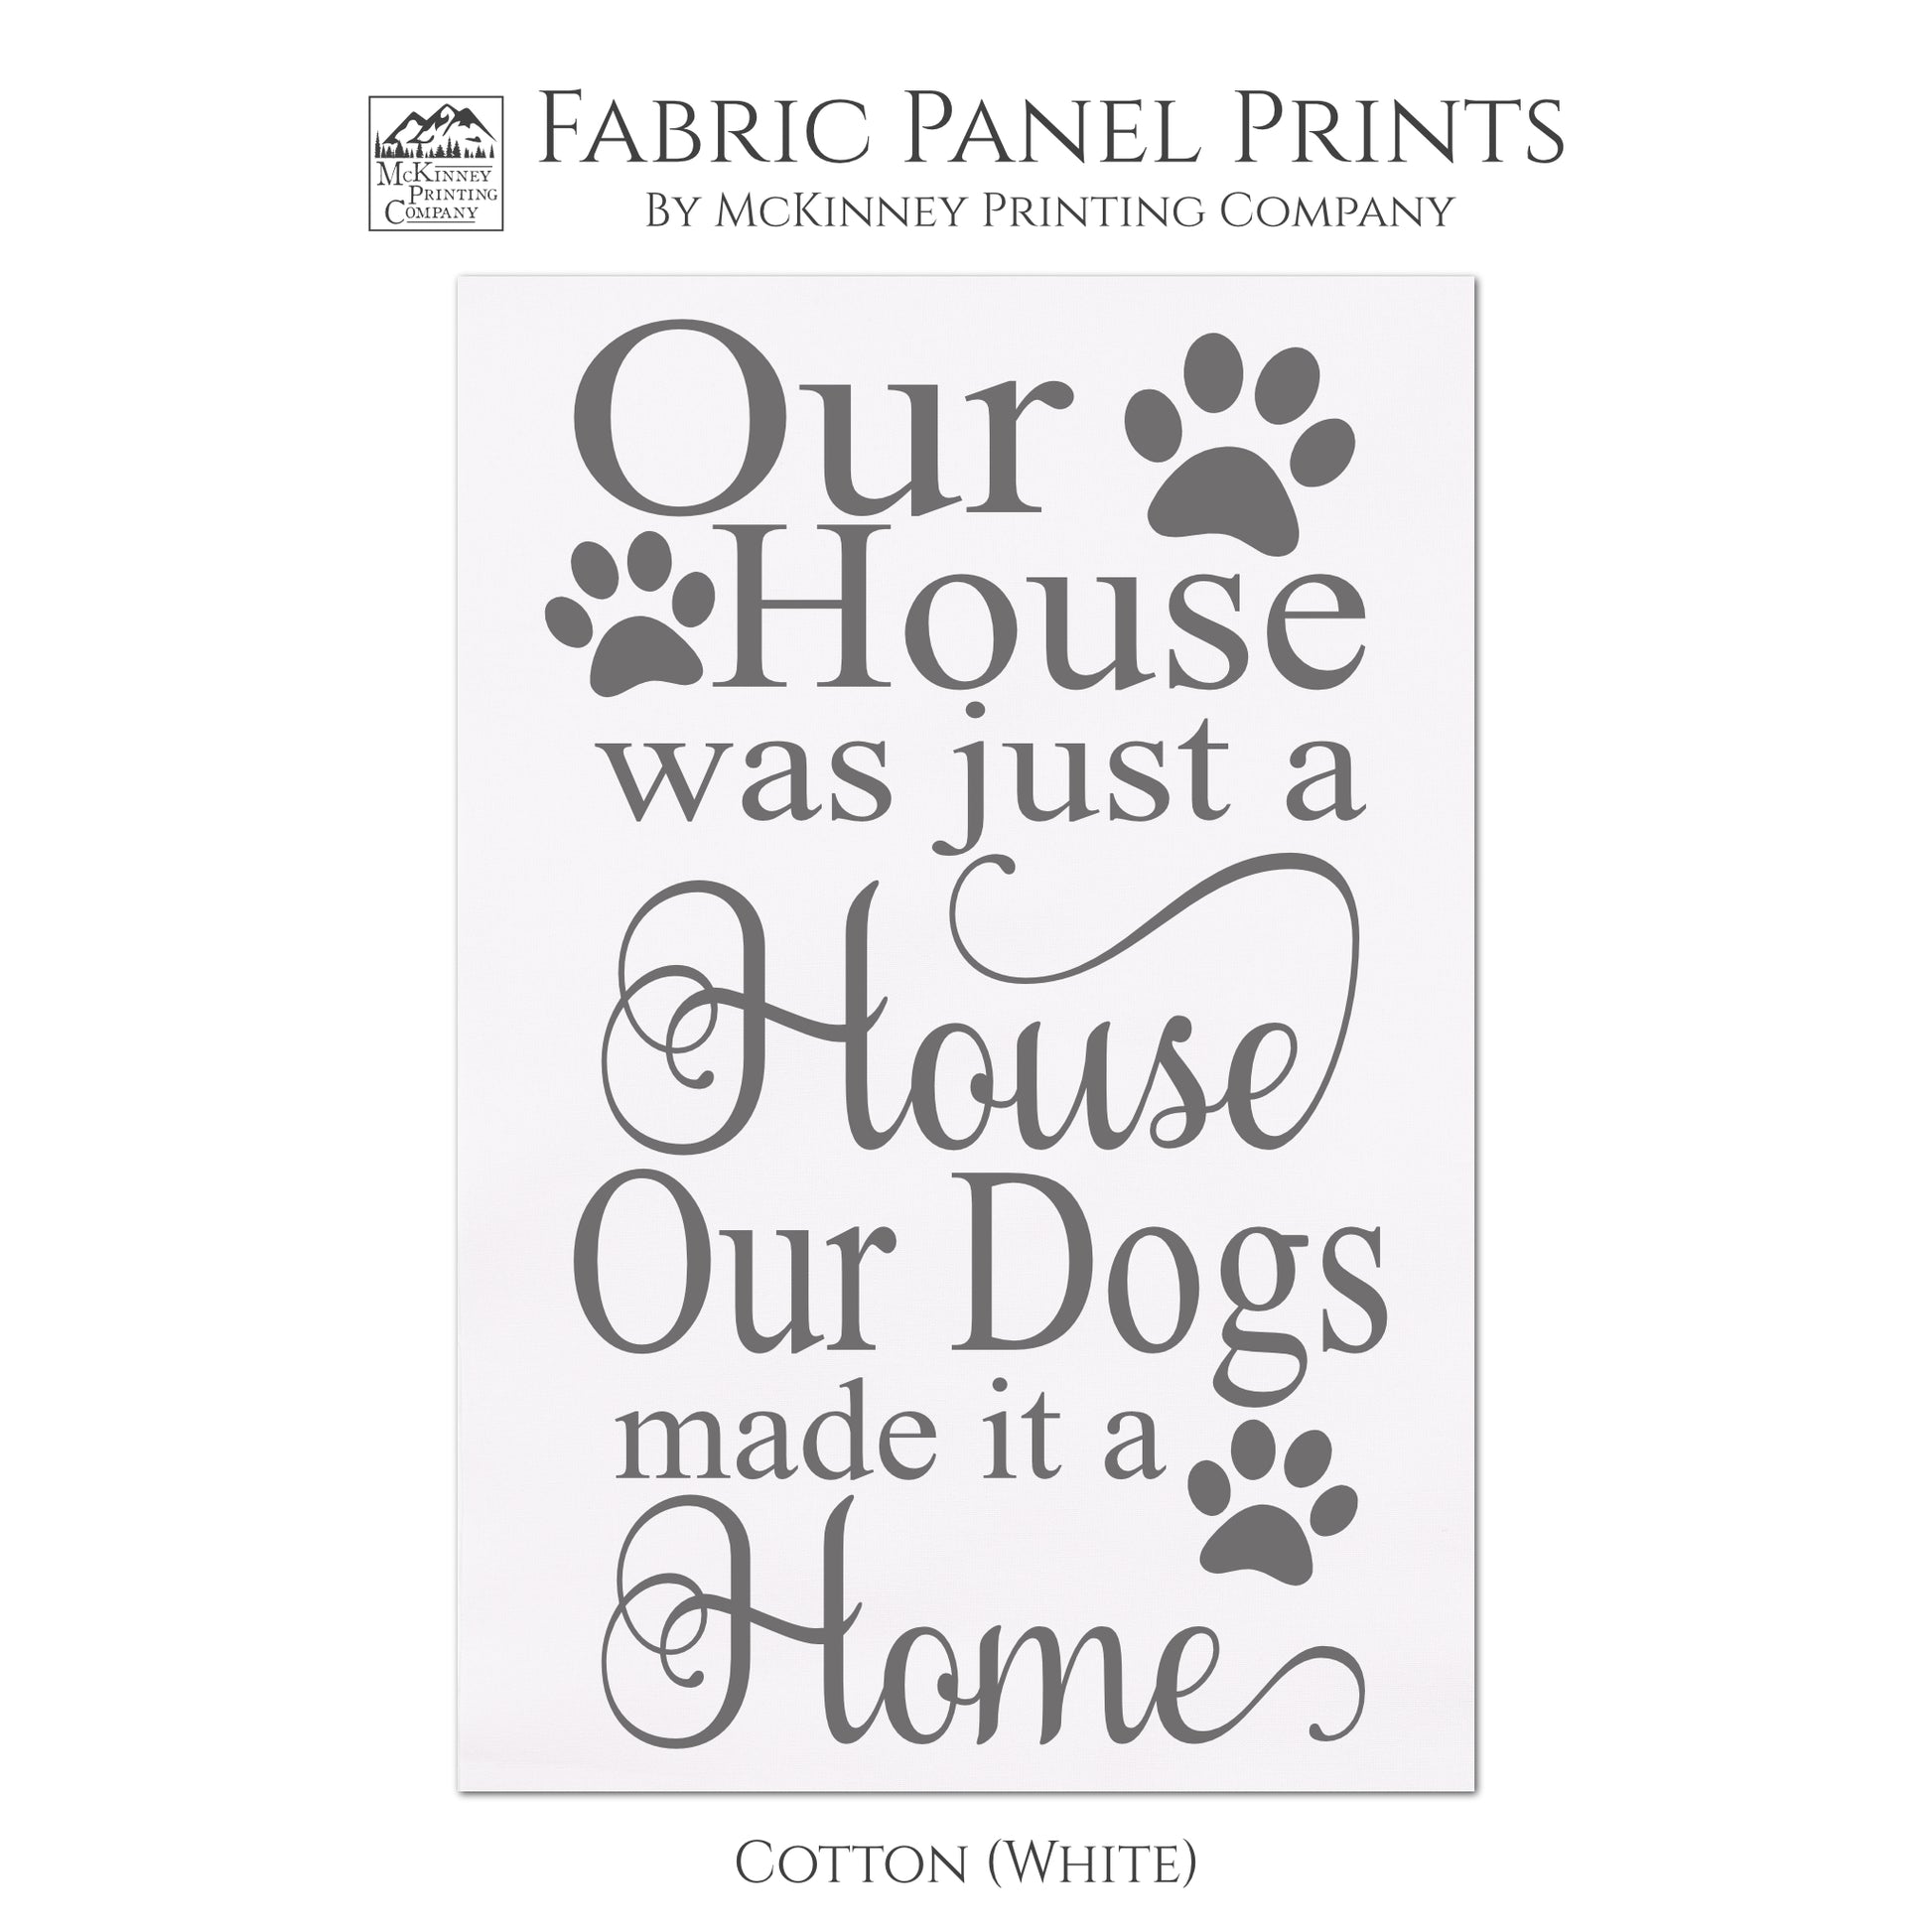 Our house was just a house.  Our dogs made it a home. Dog Fabric, Dog Print, Dog Quote, Quilting, Wall Art - Cotton, White